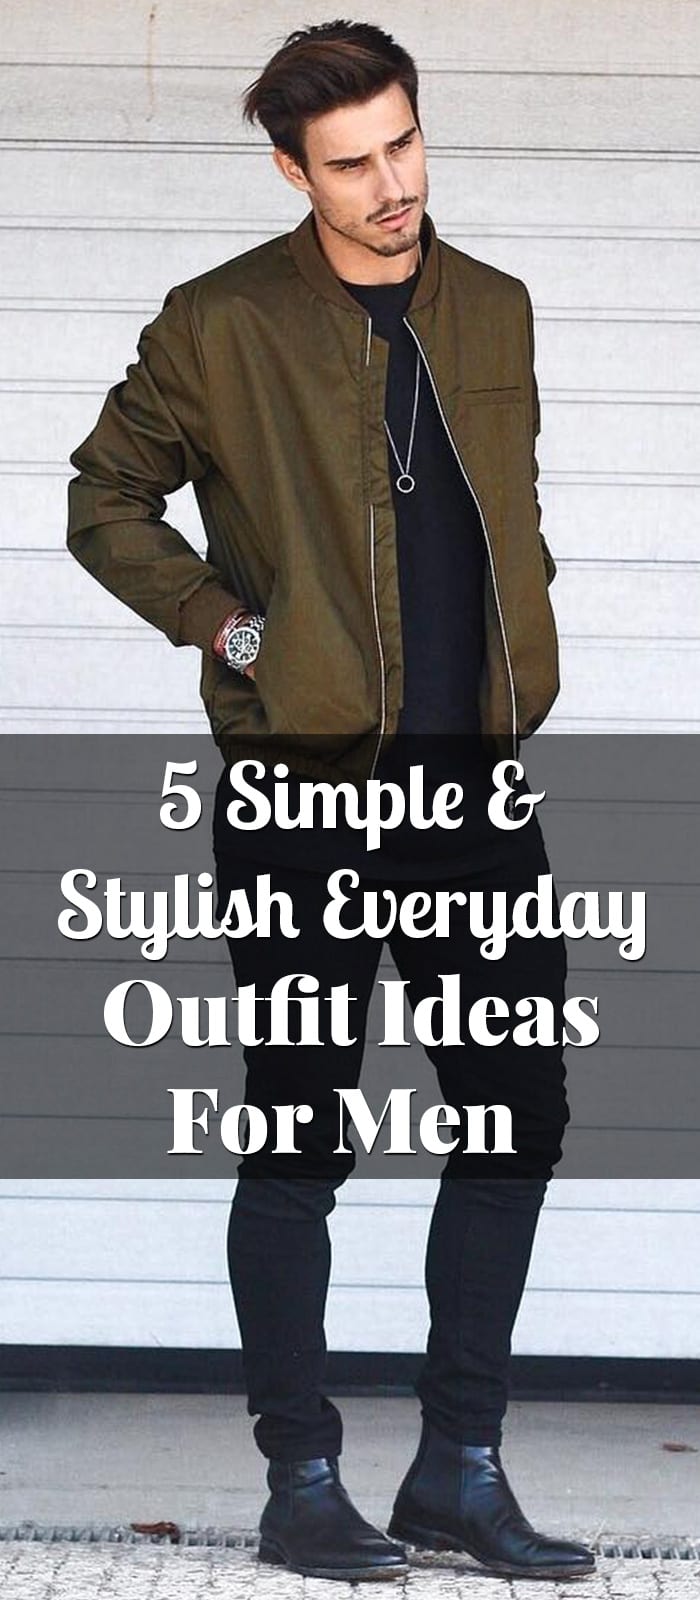 5 Simple & Stylish Everyday Outfit Ideas For Men